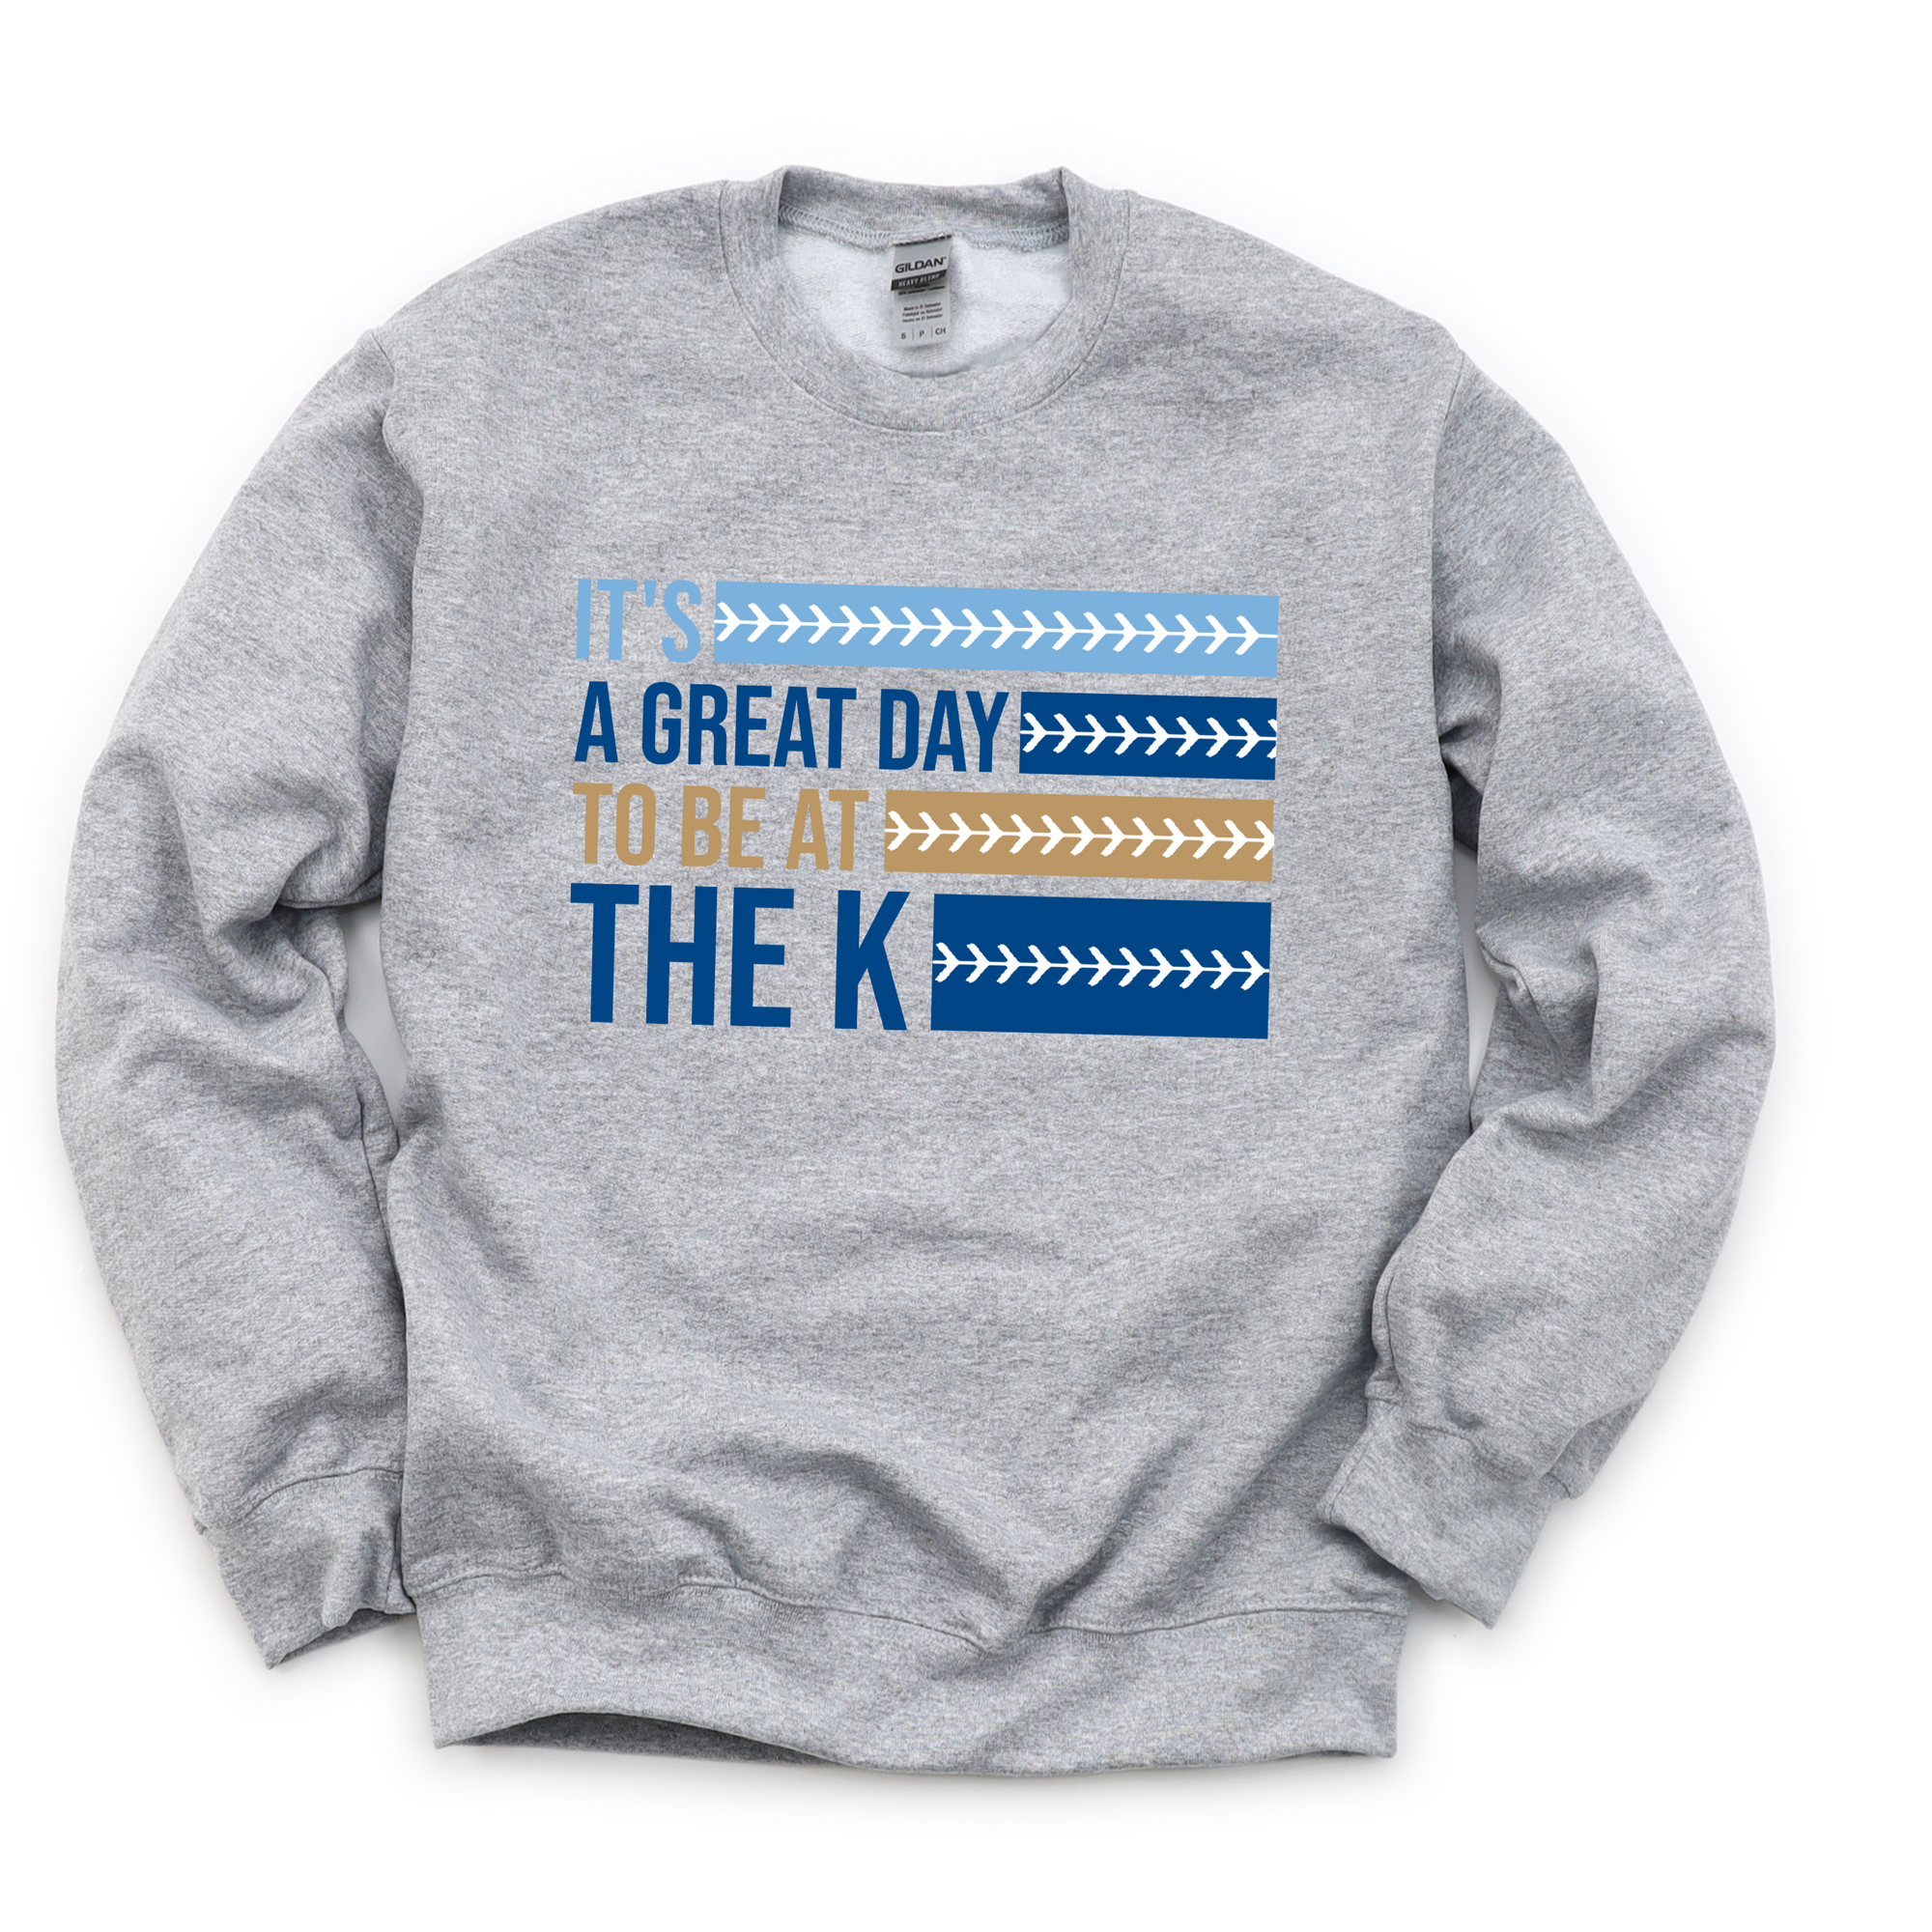 It's A Great Day to Be At the K Tee OR Sweatshirt